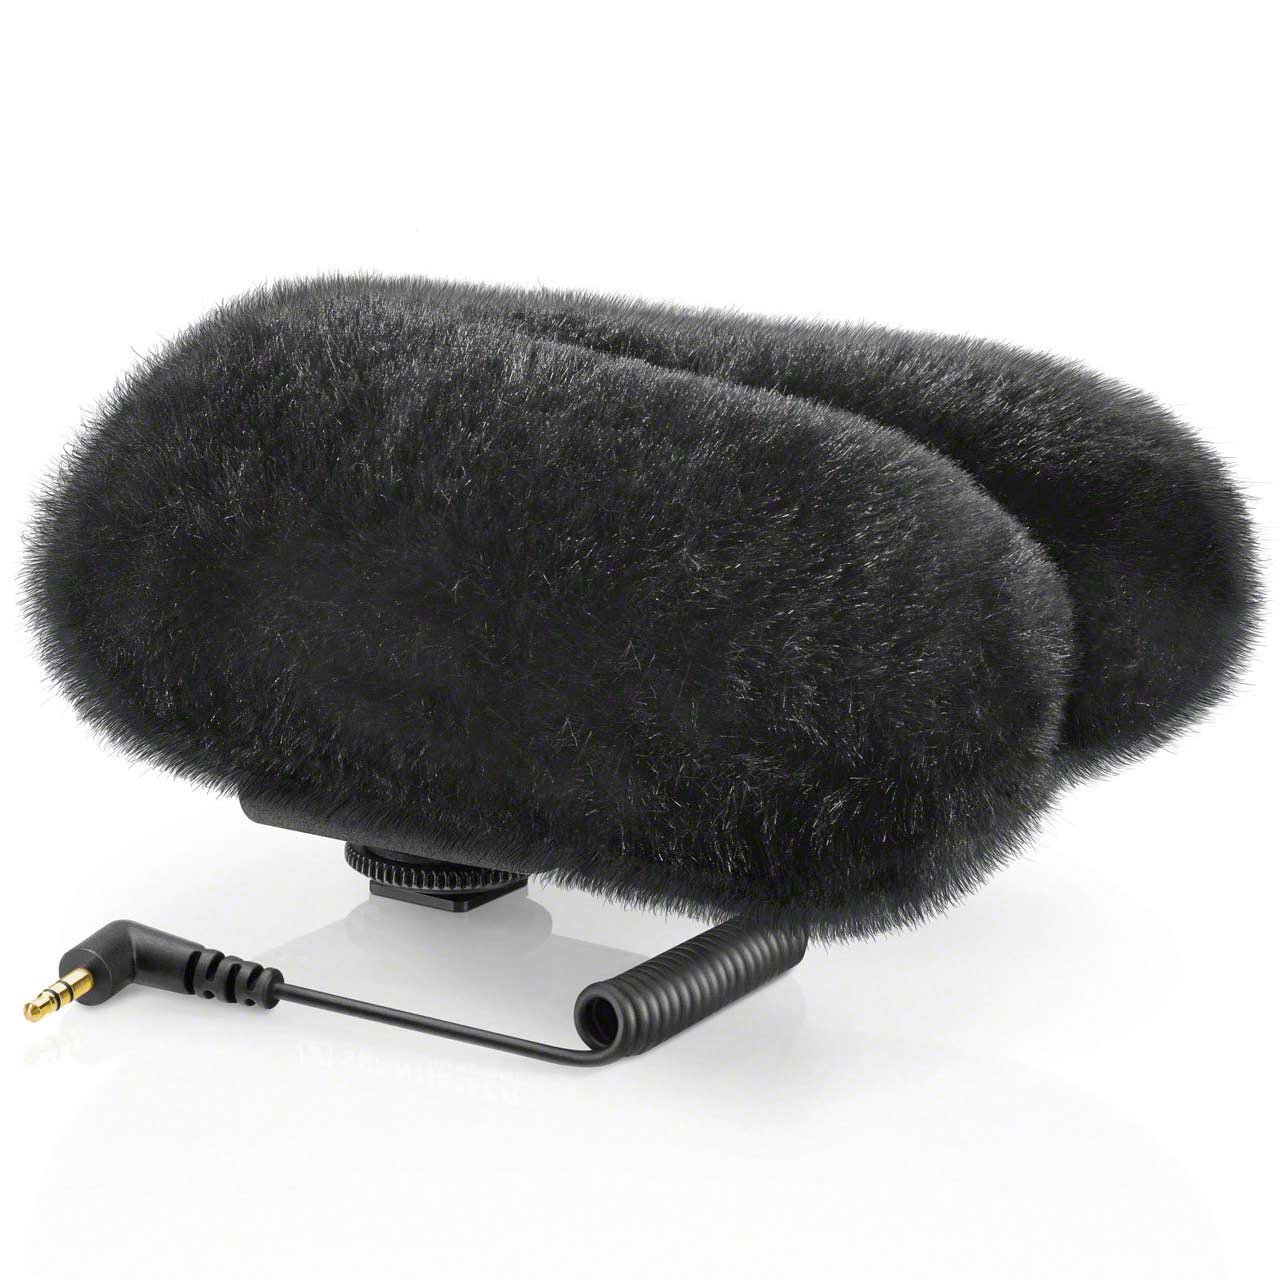 Microphone Accessories - Sennheiser MZH 440 Fur Windshield For The MKE 440